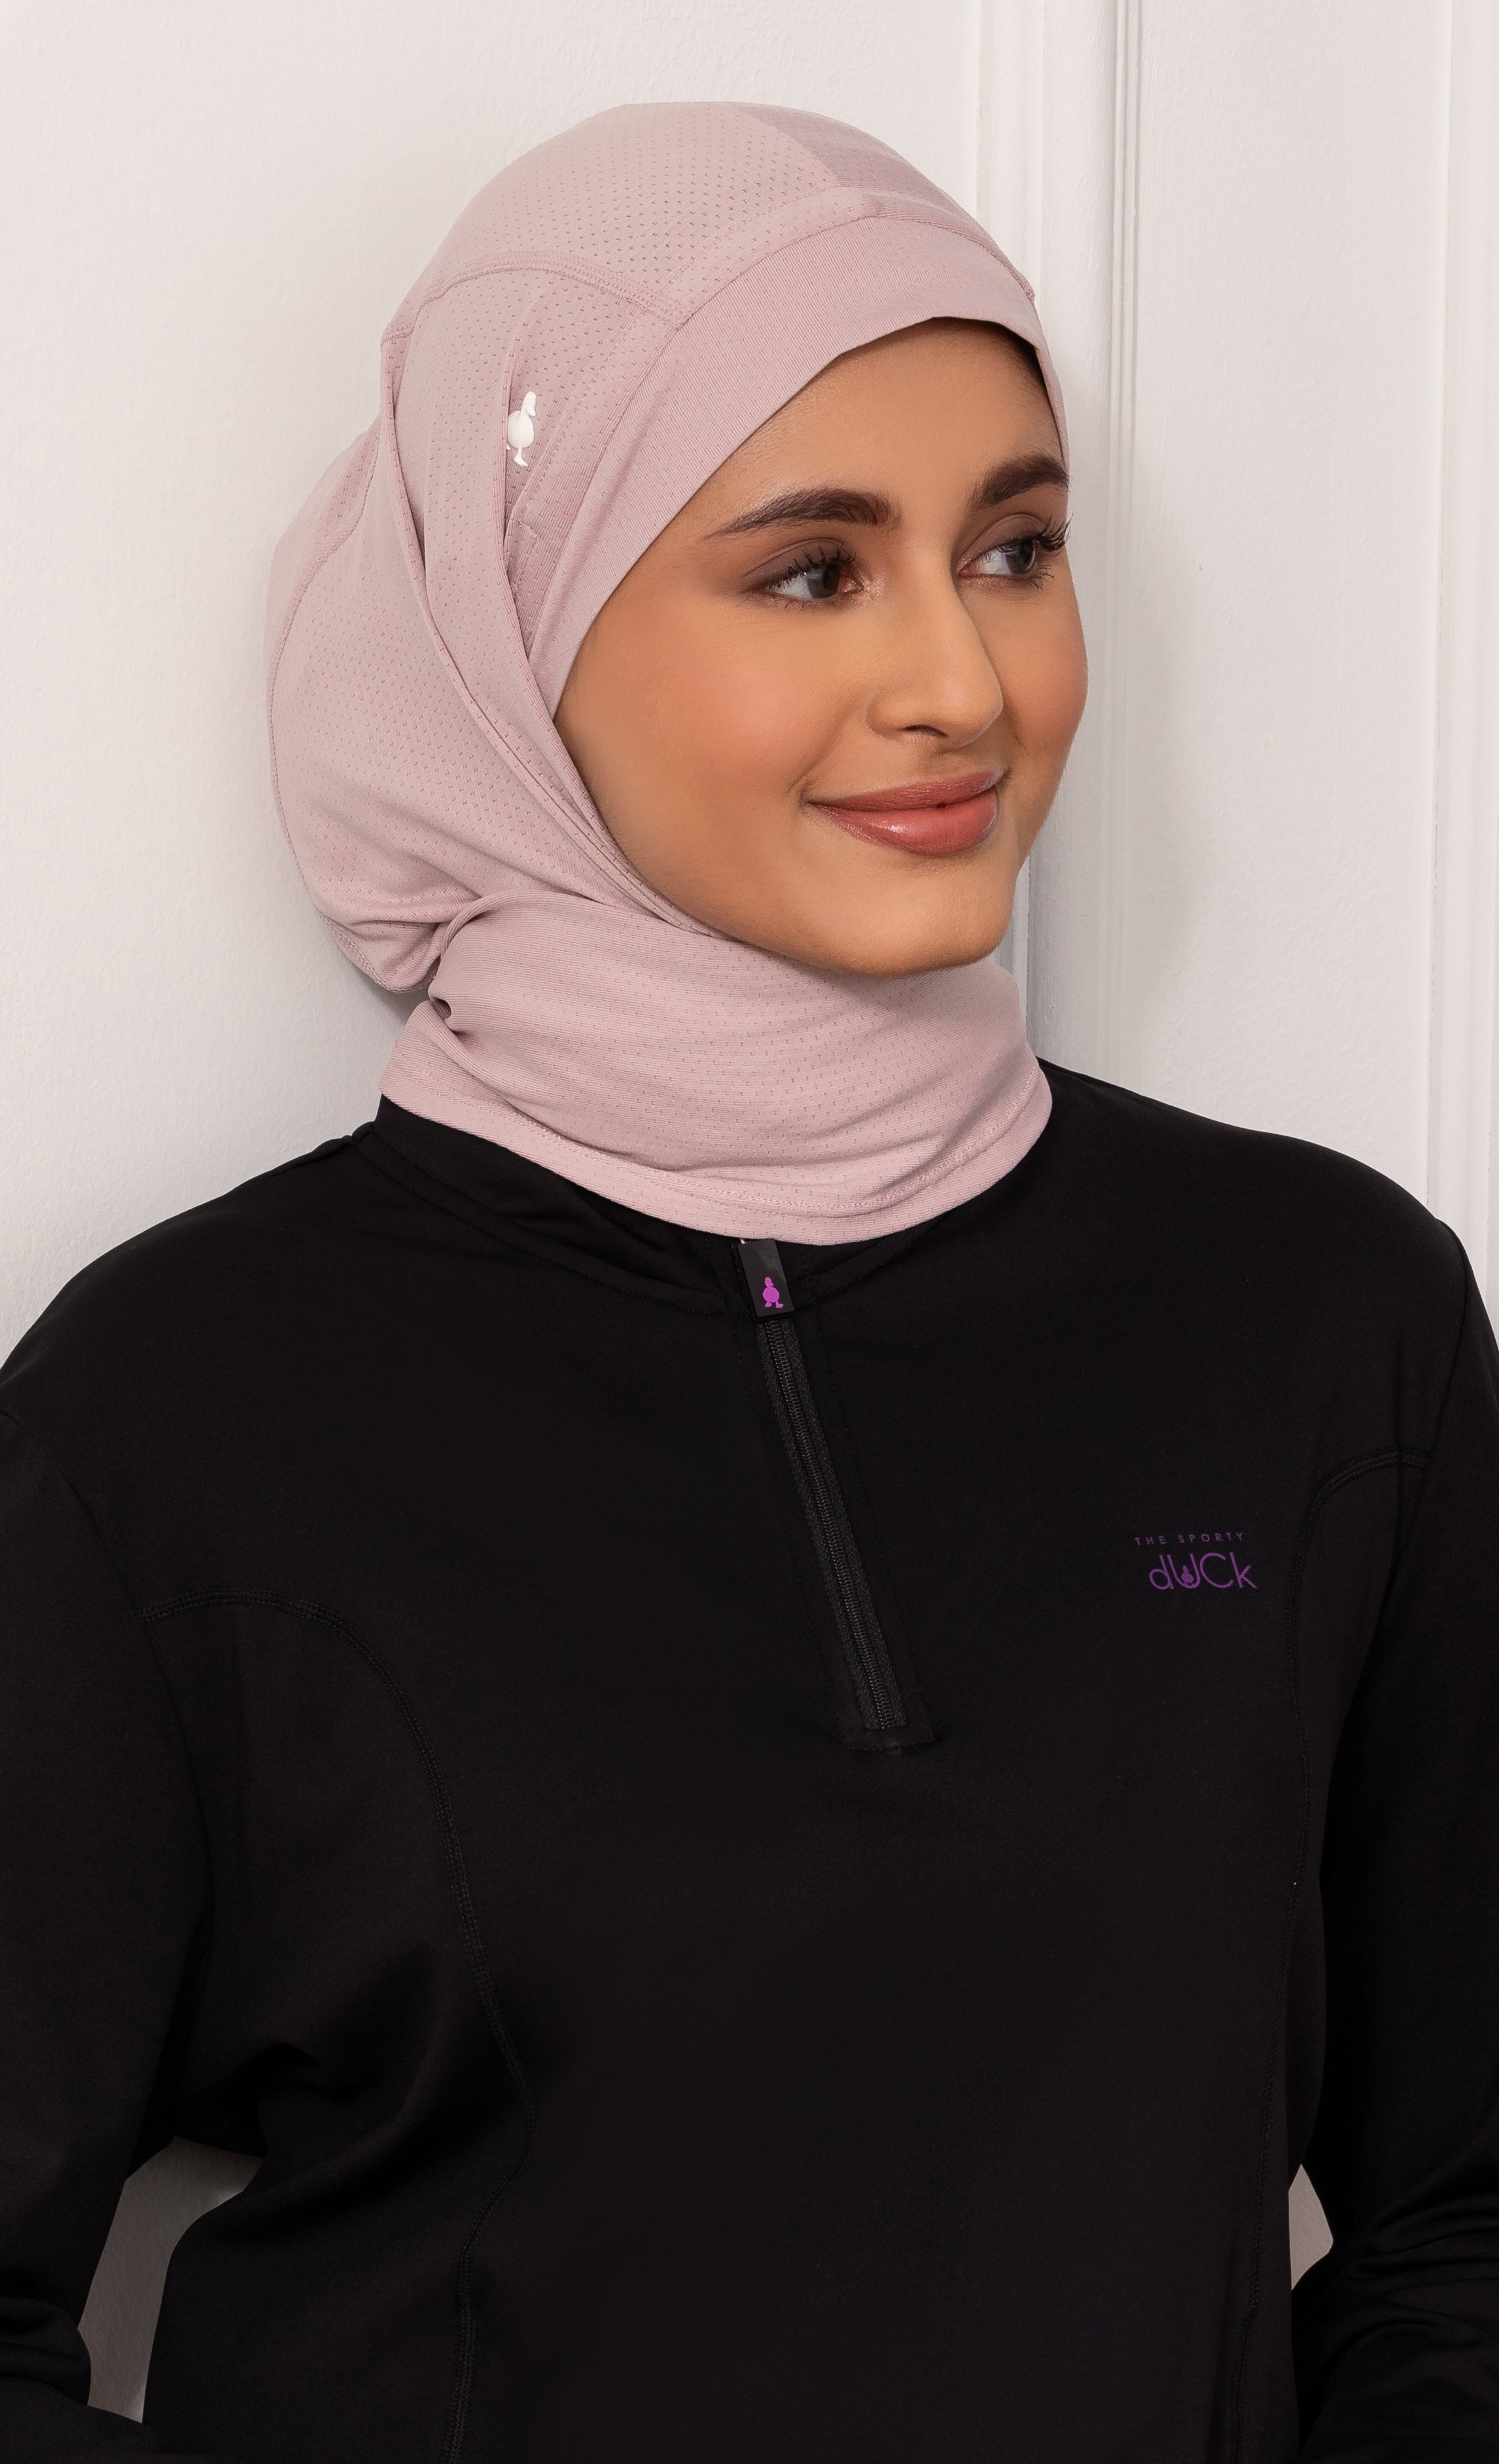 The Sporty dUCk Active Scarf in Rosy